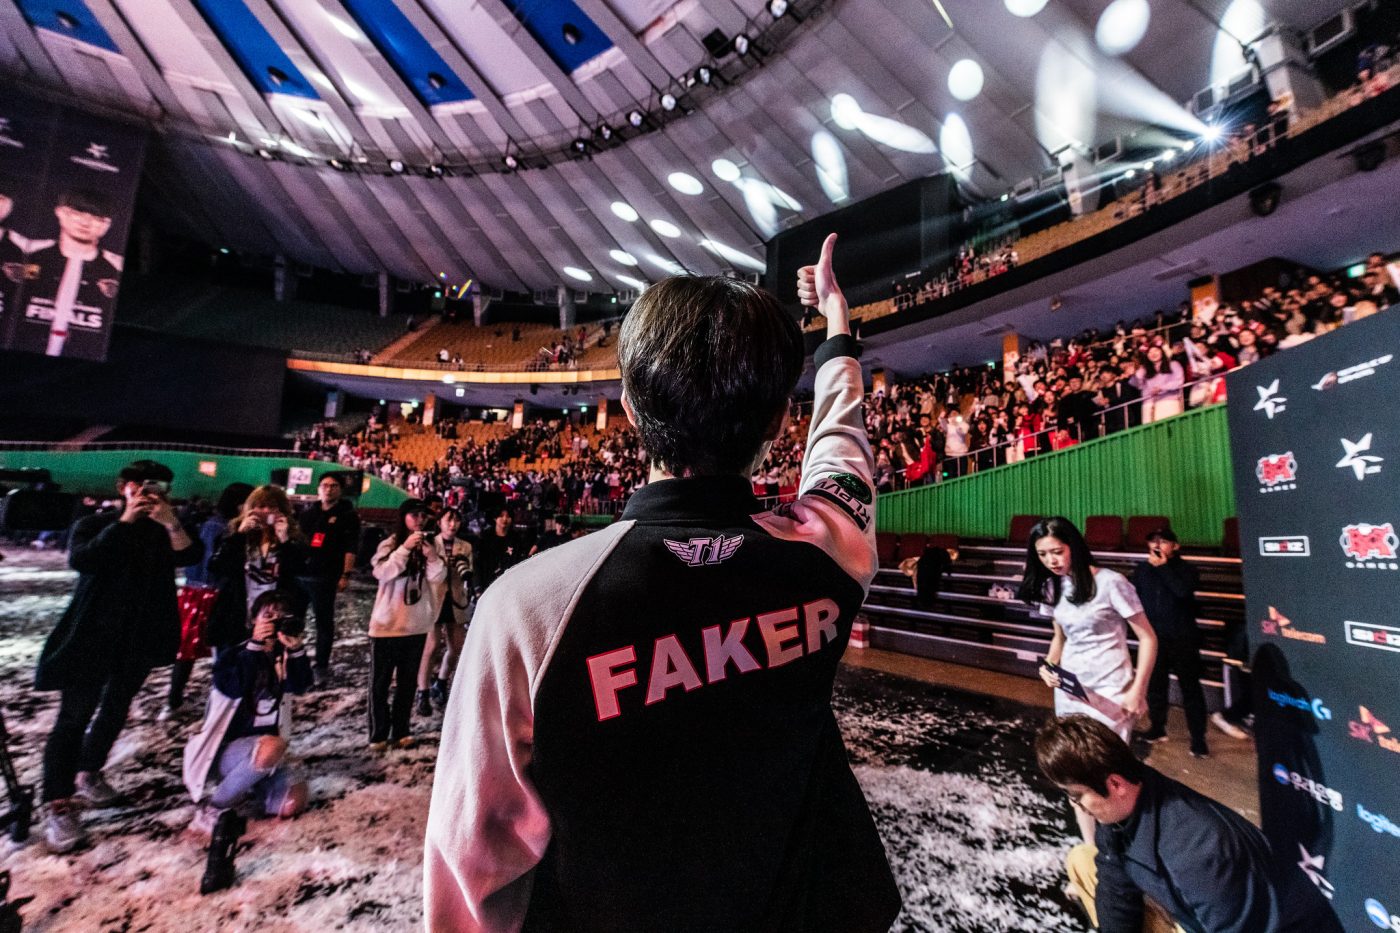 LCK T1 Faker gives the crowd a thumbs up